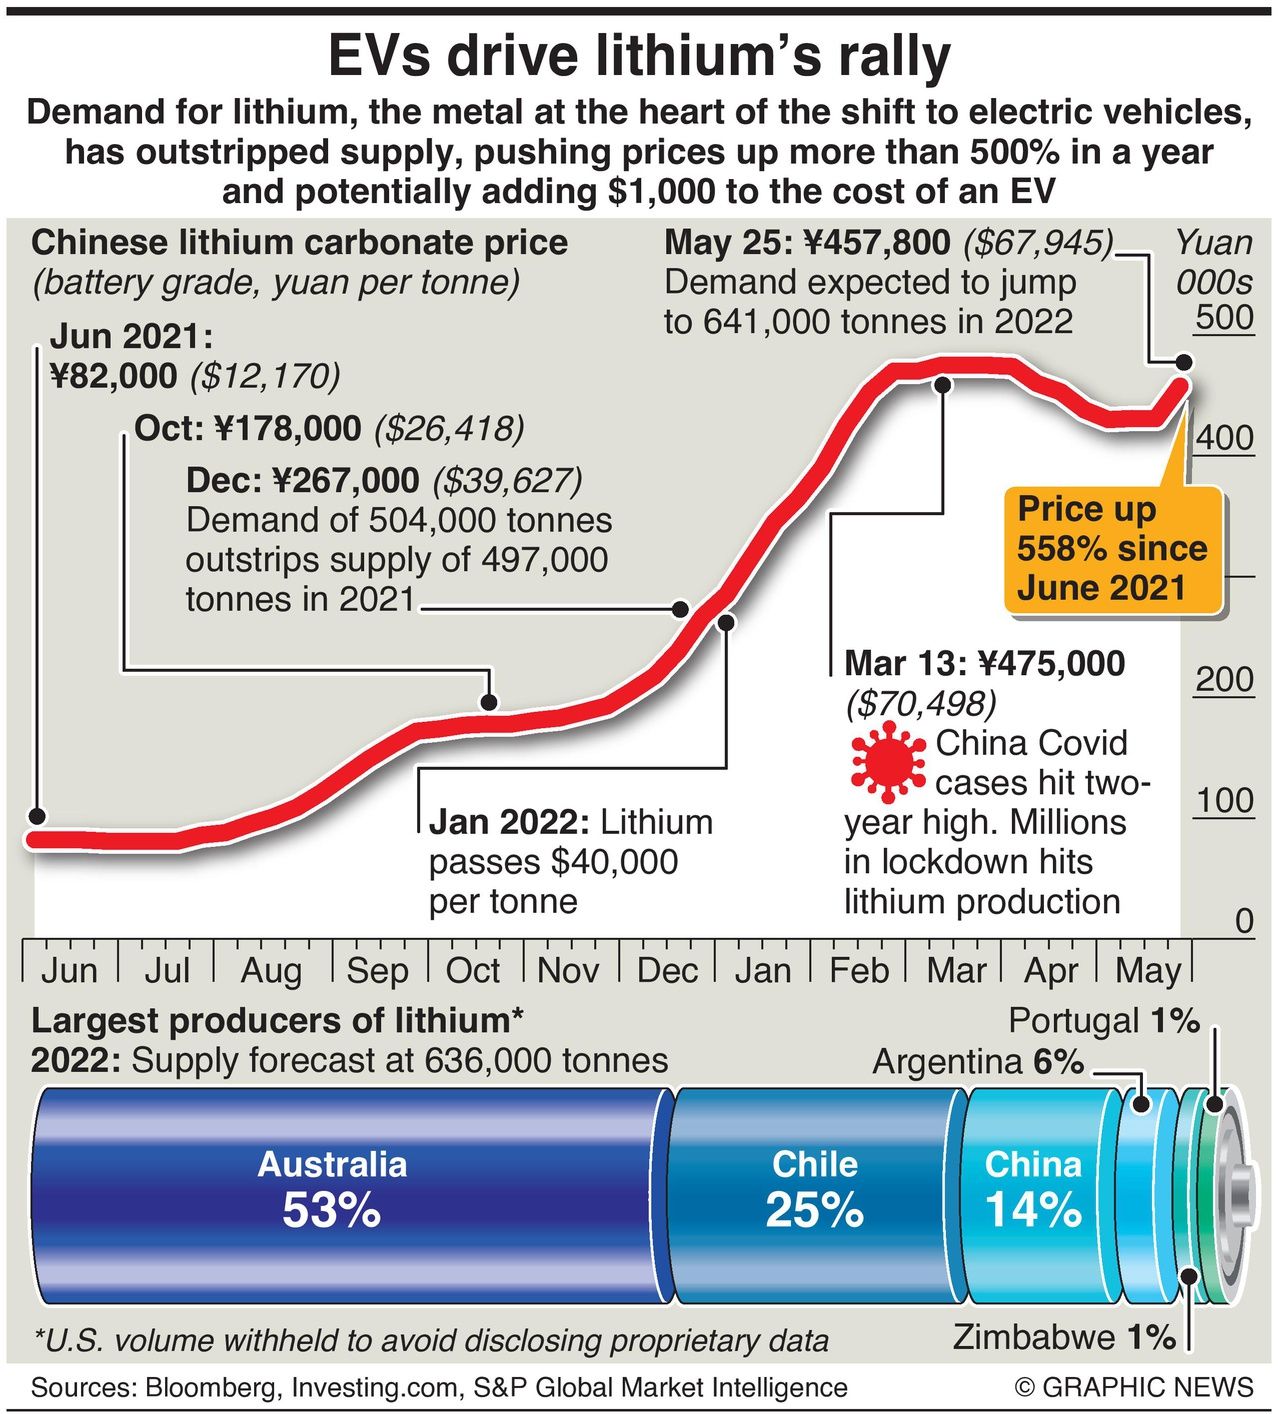 Cost of Lithium increased due to demand infographic provided by graphic news Duncan mil